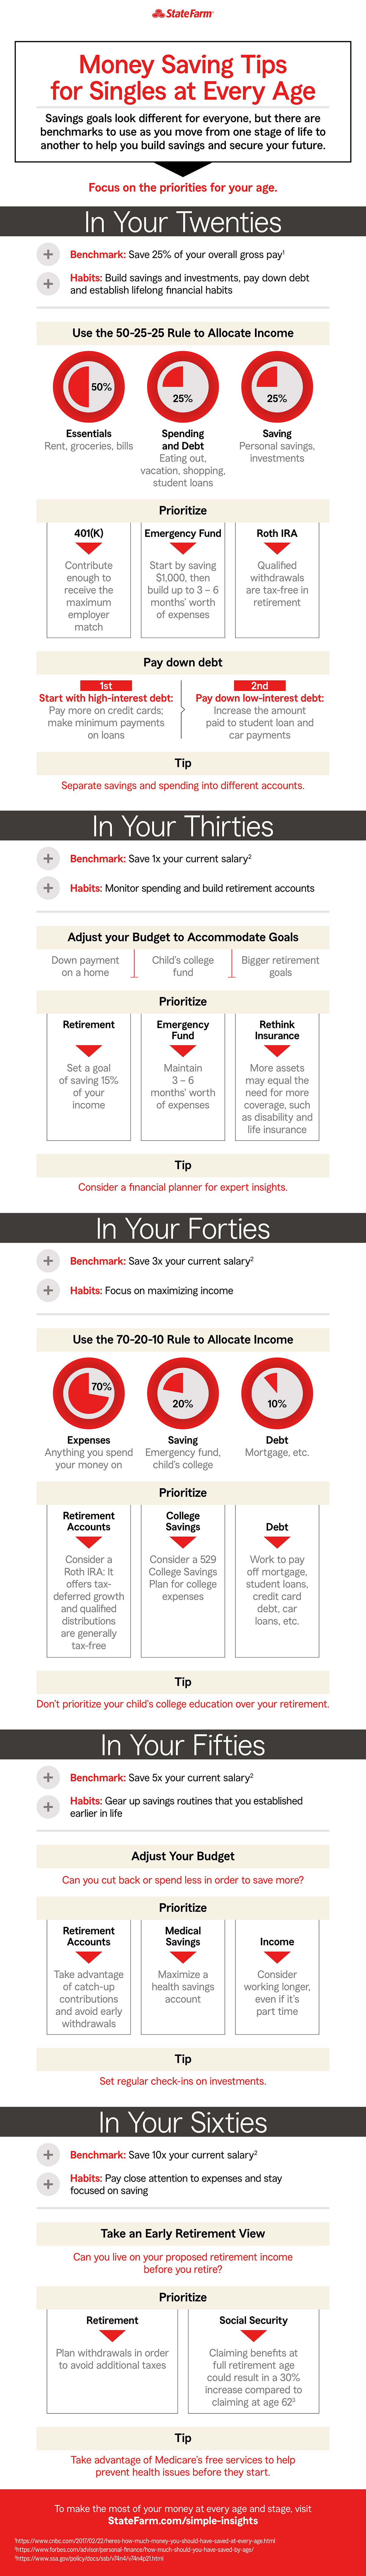 Infographic with money saving tips for singles at any age.